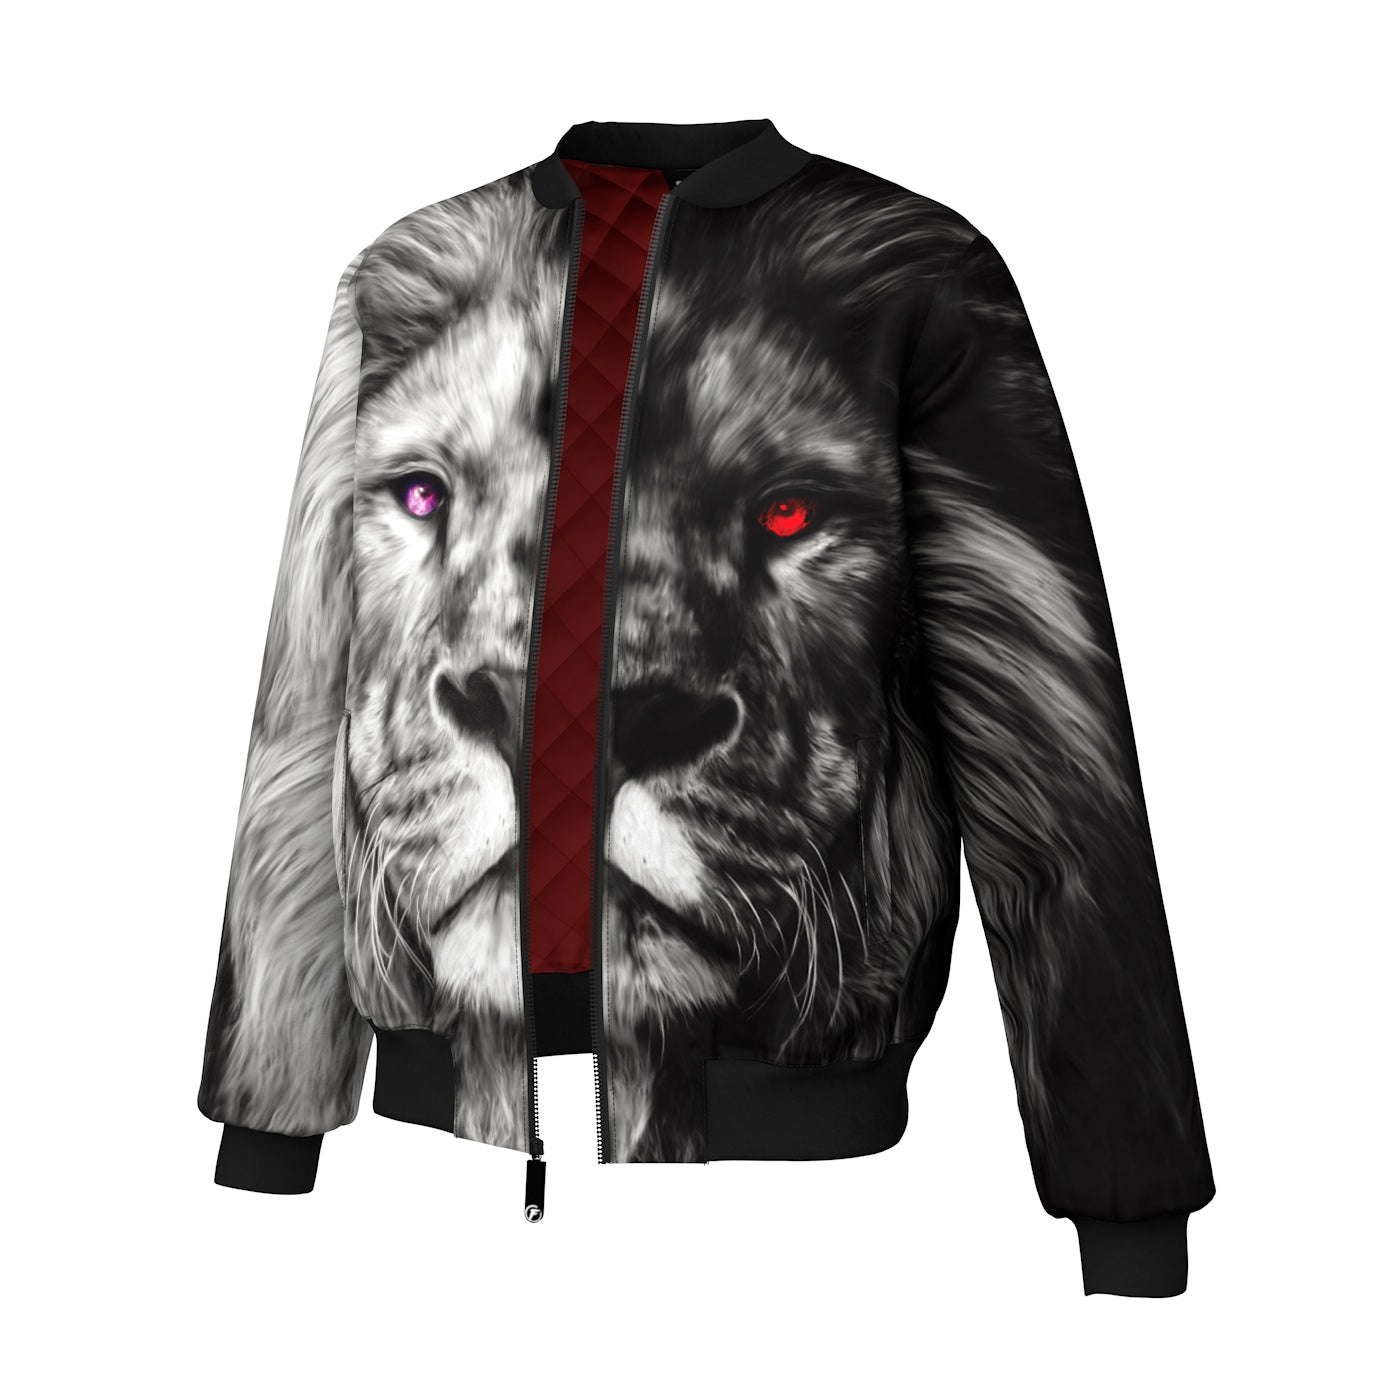 The Justice Seeker Bomber Jacket